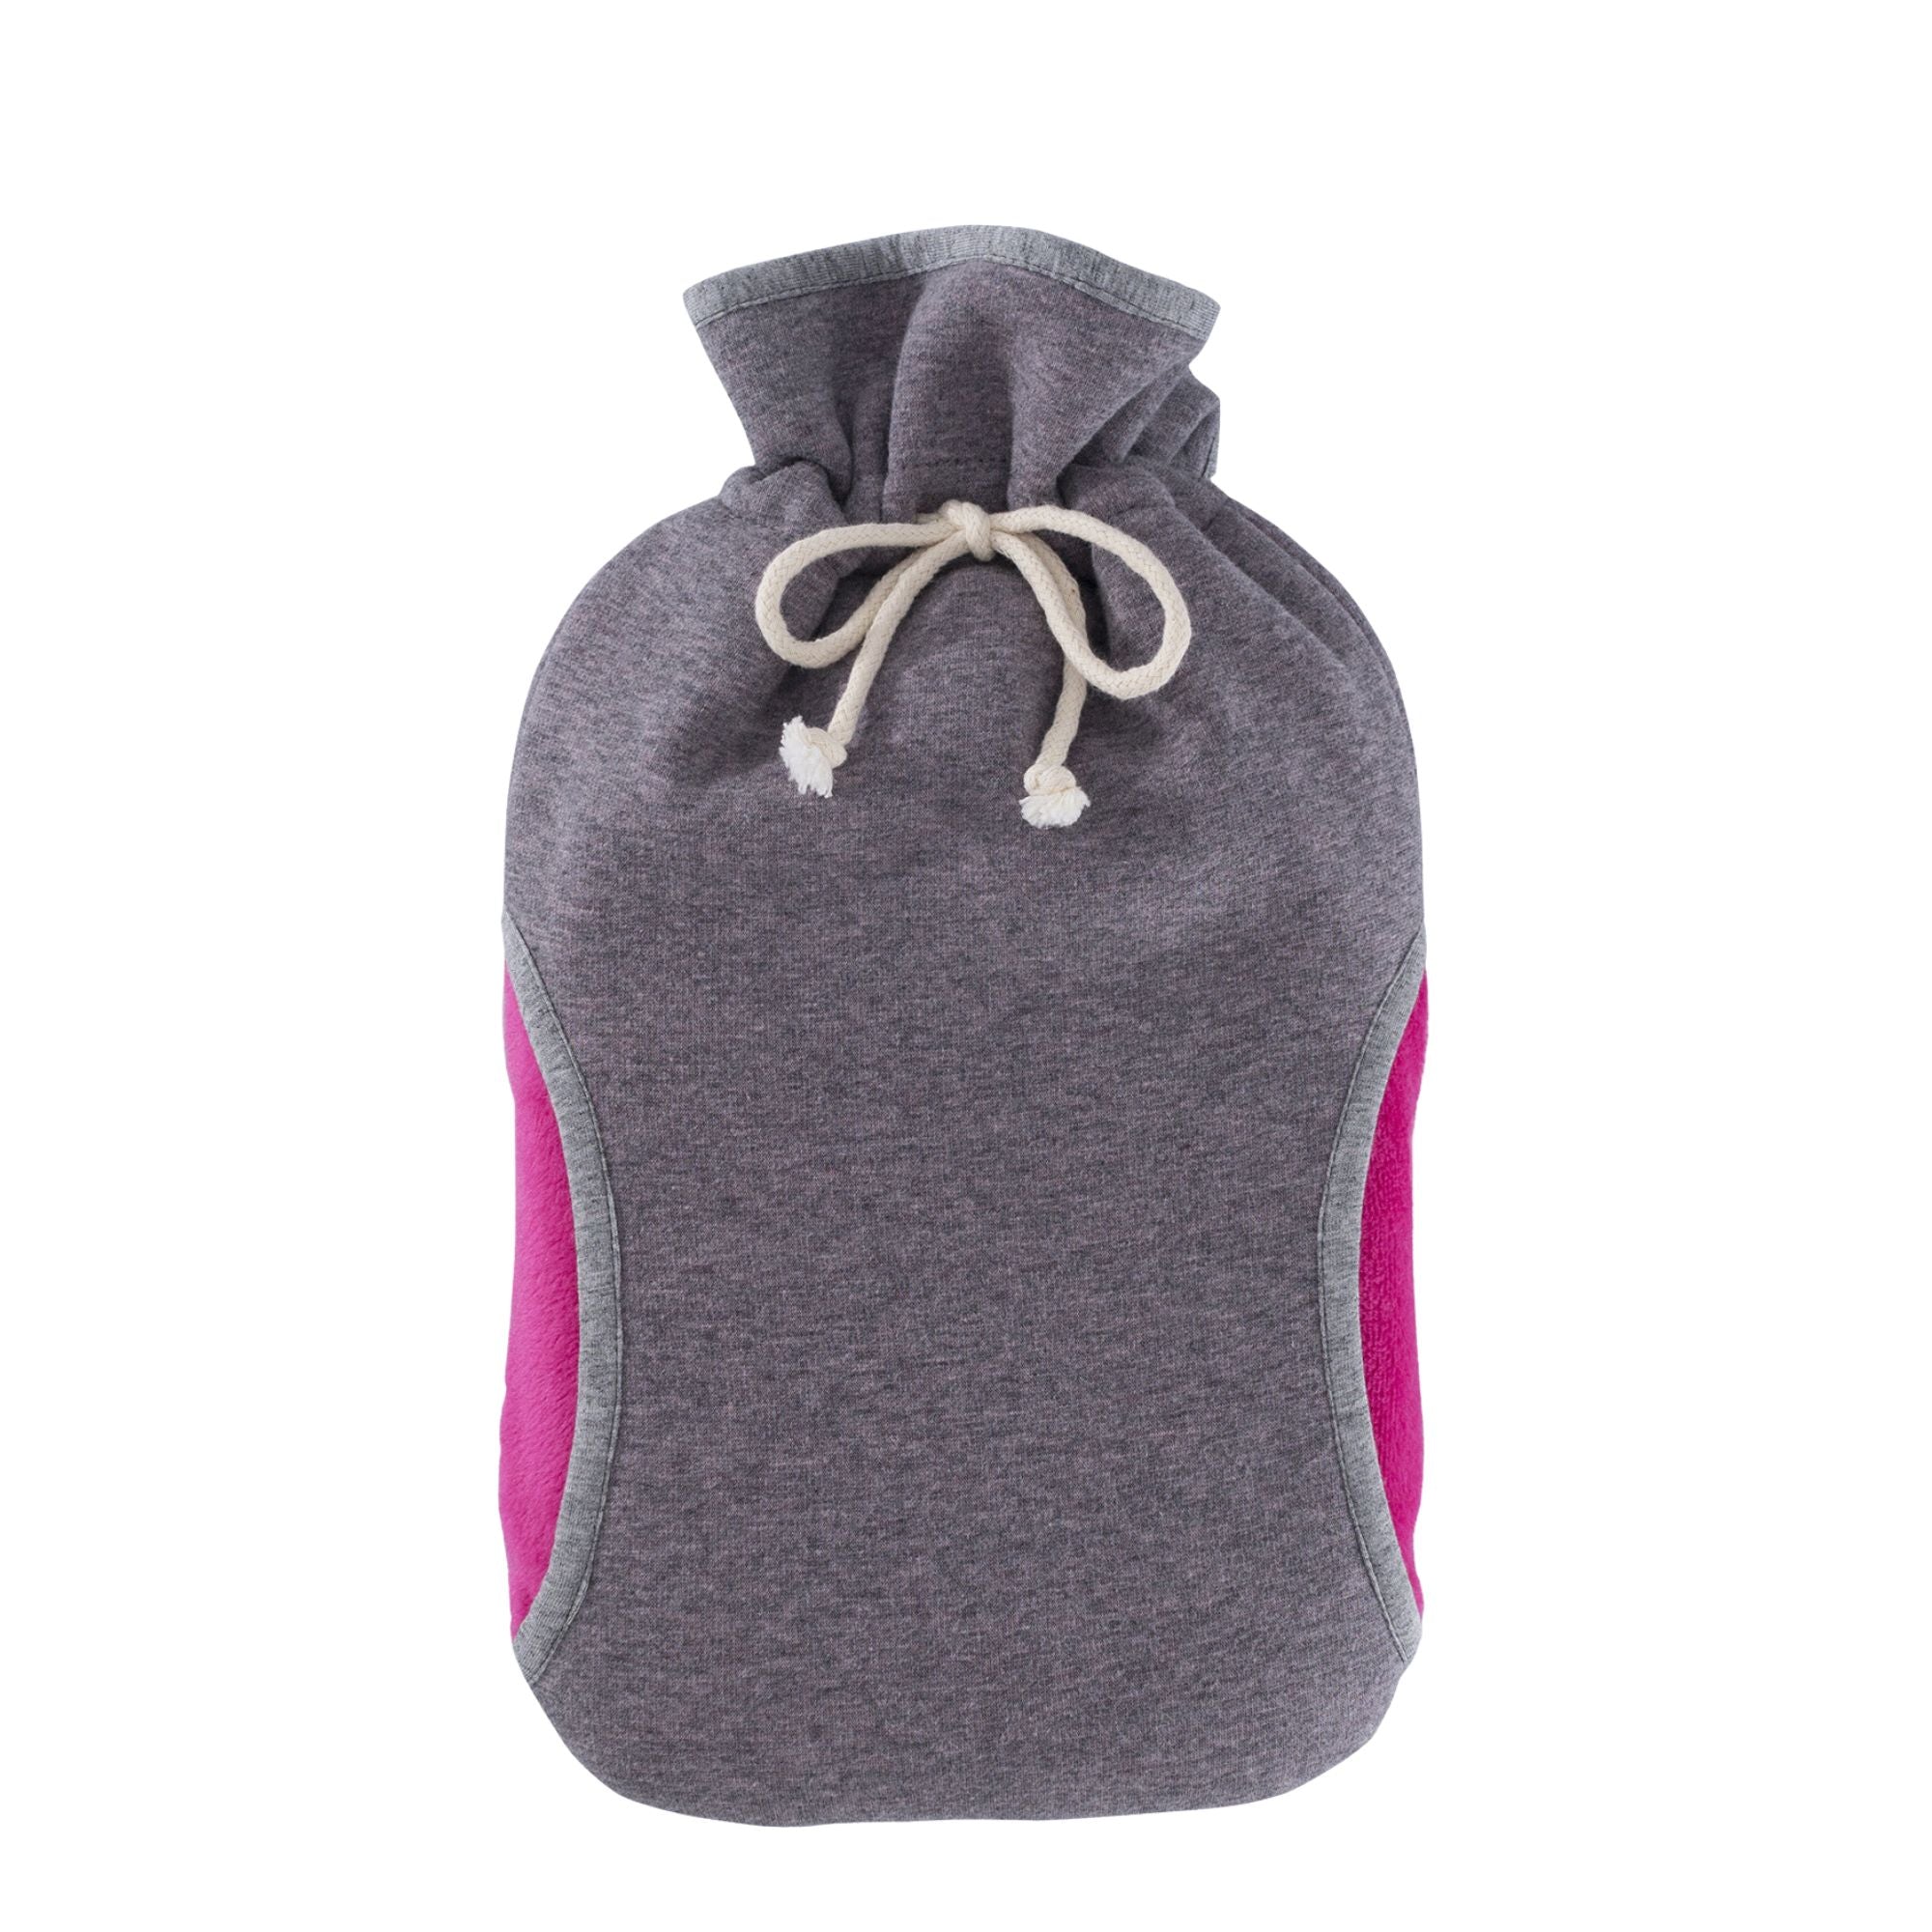 2 Litre Eco Hot Water Bottle with Alpine Fleece Pink & Grey Cover (rubberless)